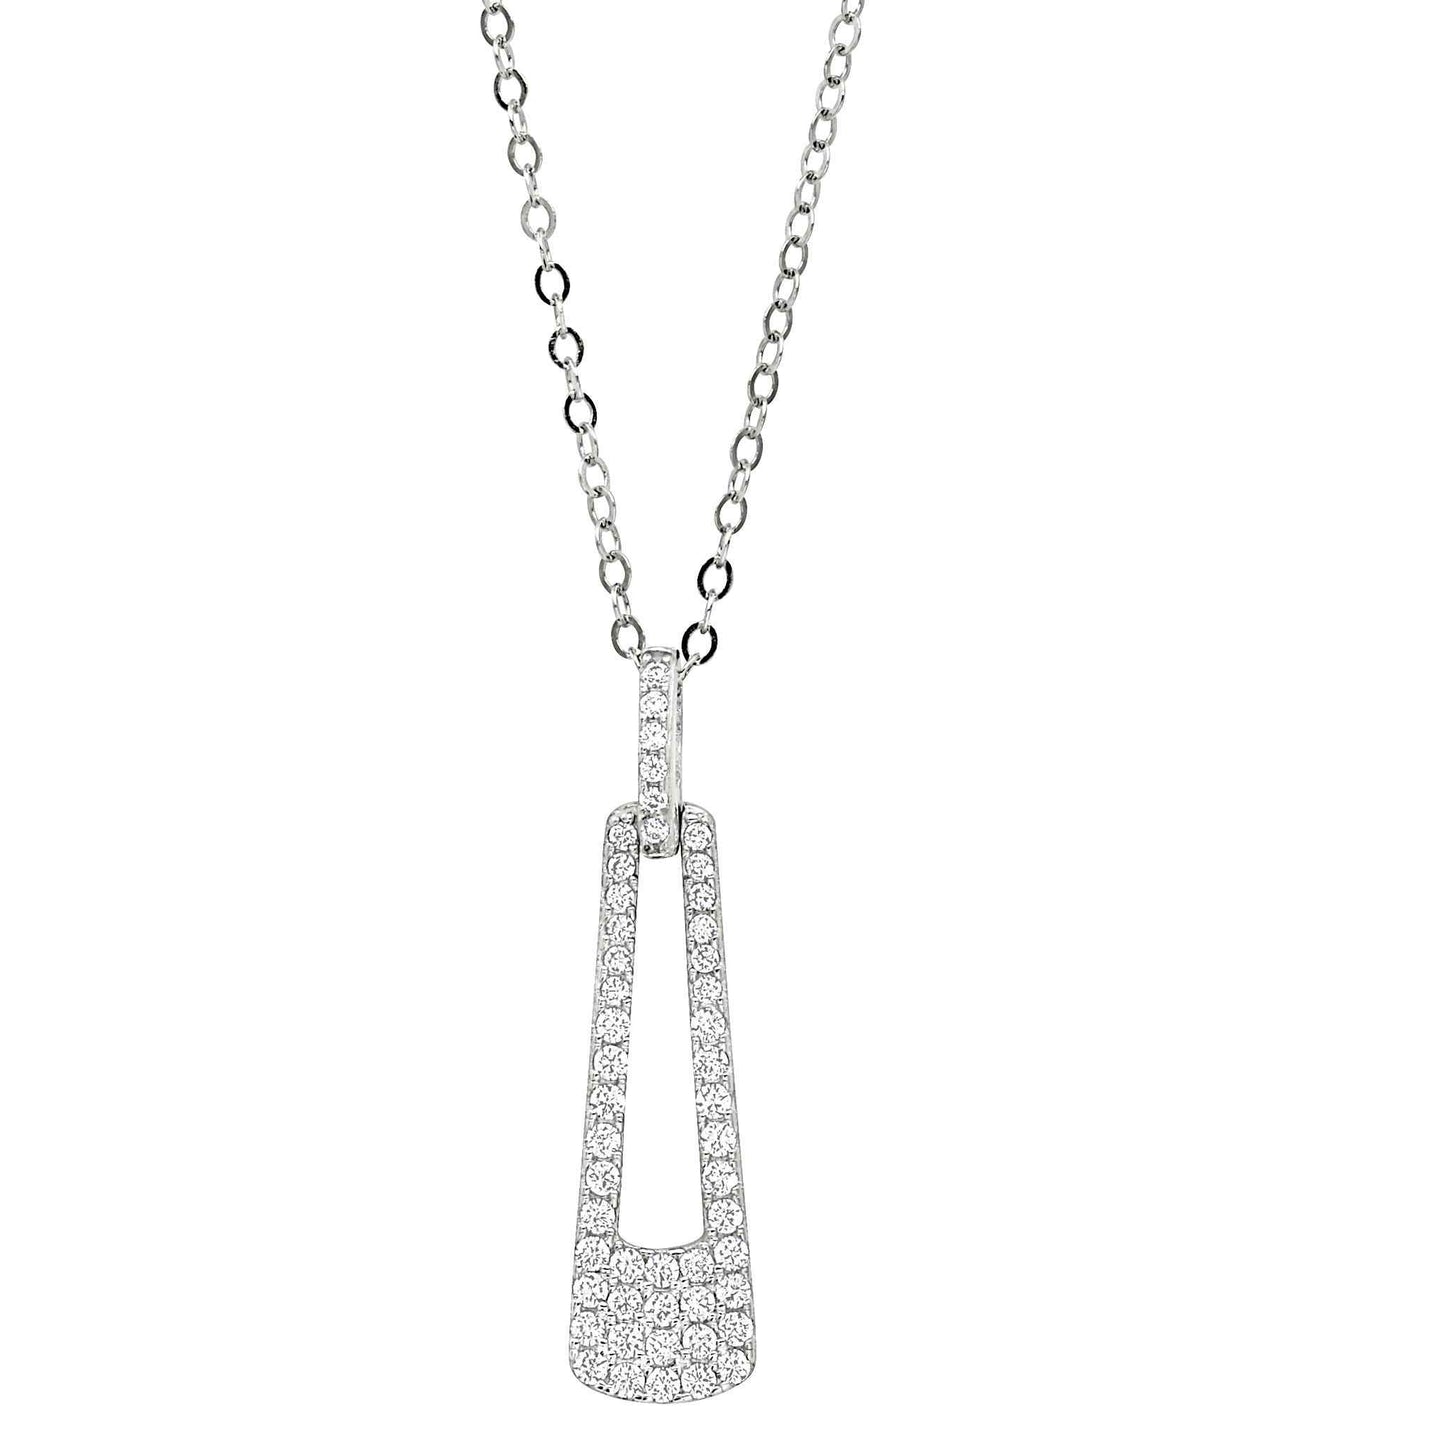 A sterling silver door knocker necklace with simulated diamonds displayed on a neutral white background.